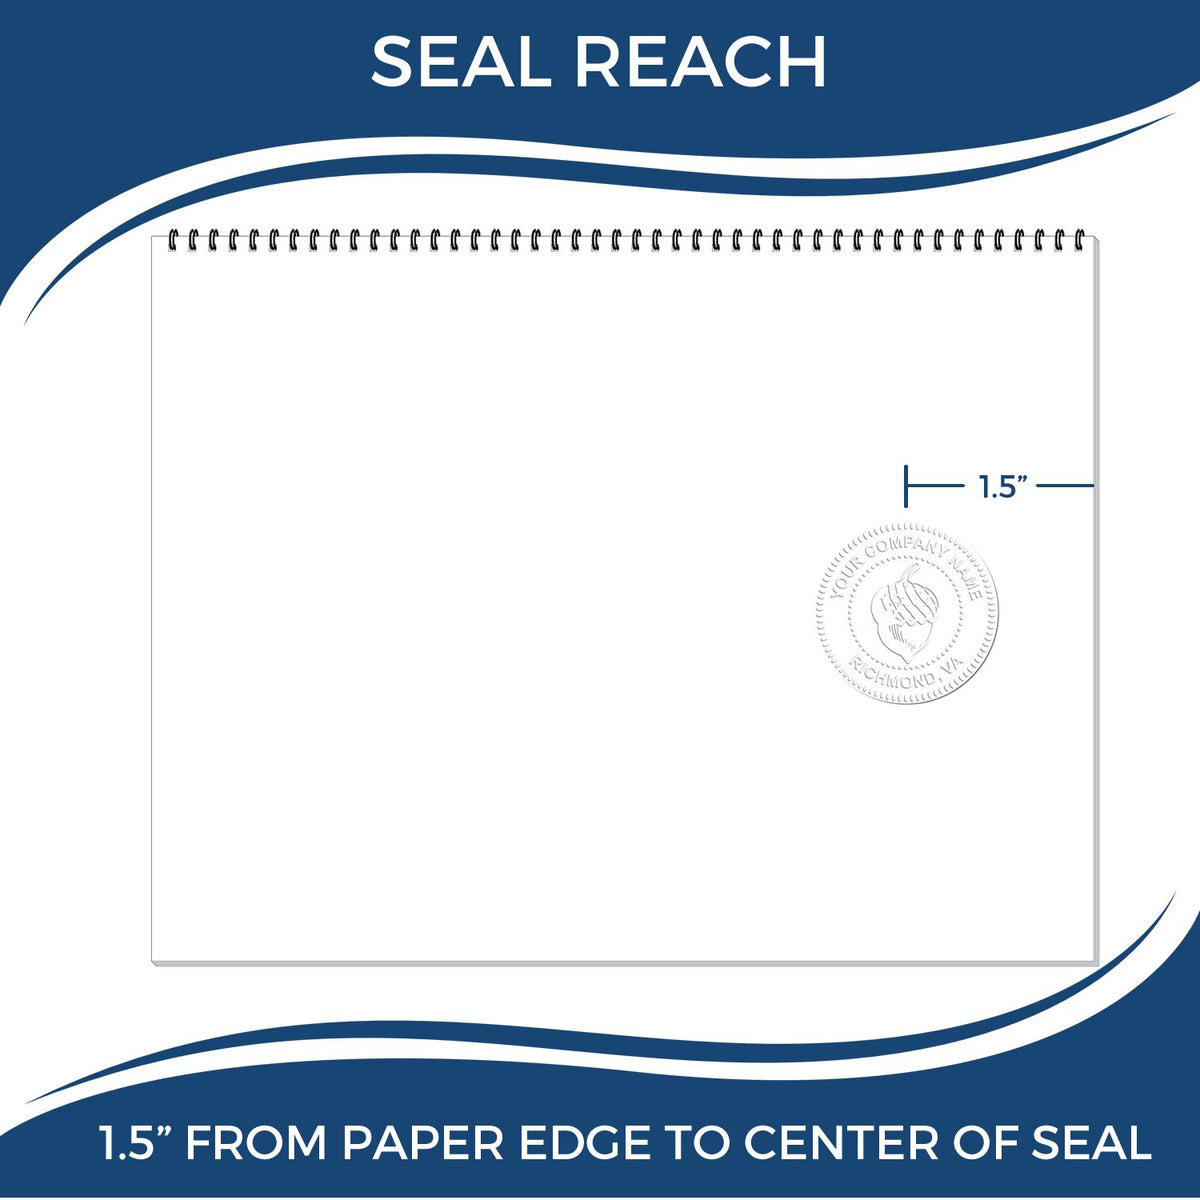 An infographic showing the seal reach which is represented by a ruler and a miniature seal image of the Pennsylvania Geologist Desk Seal